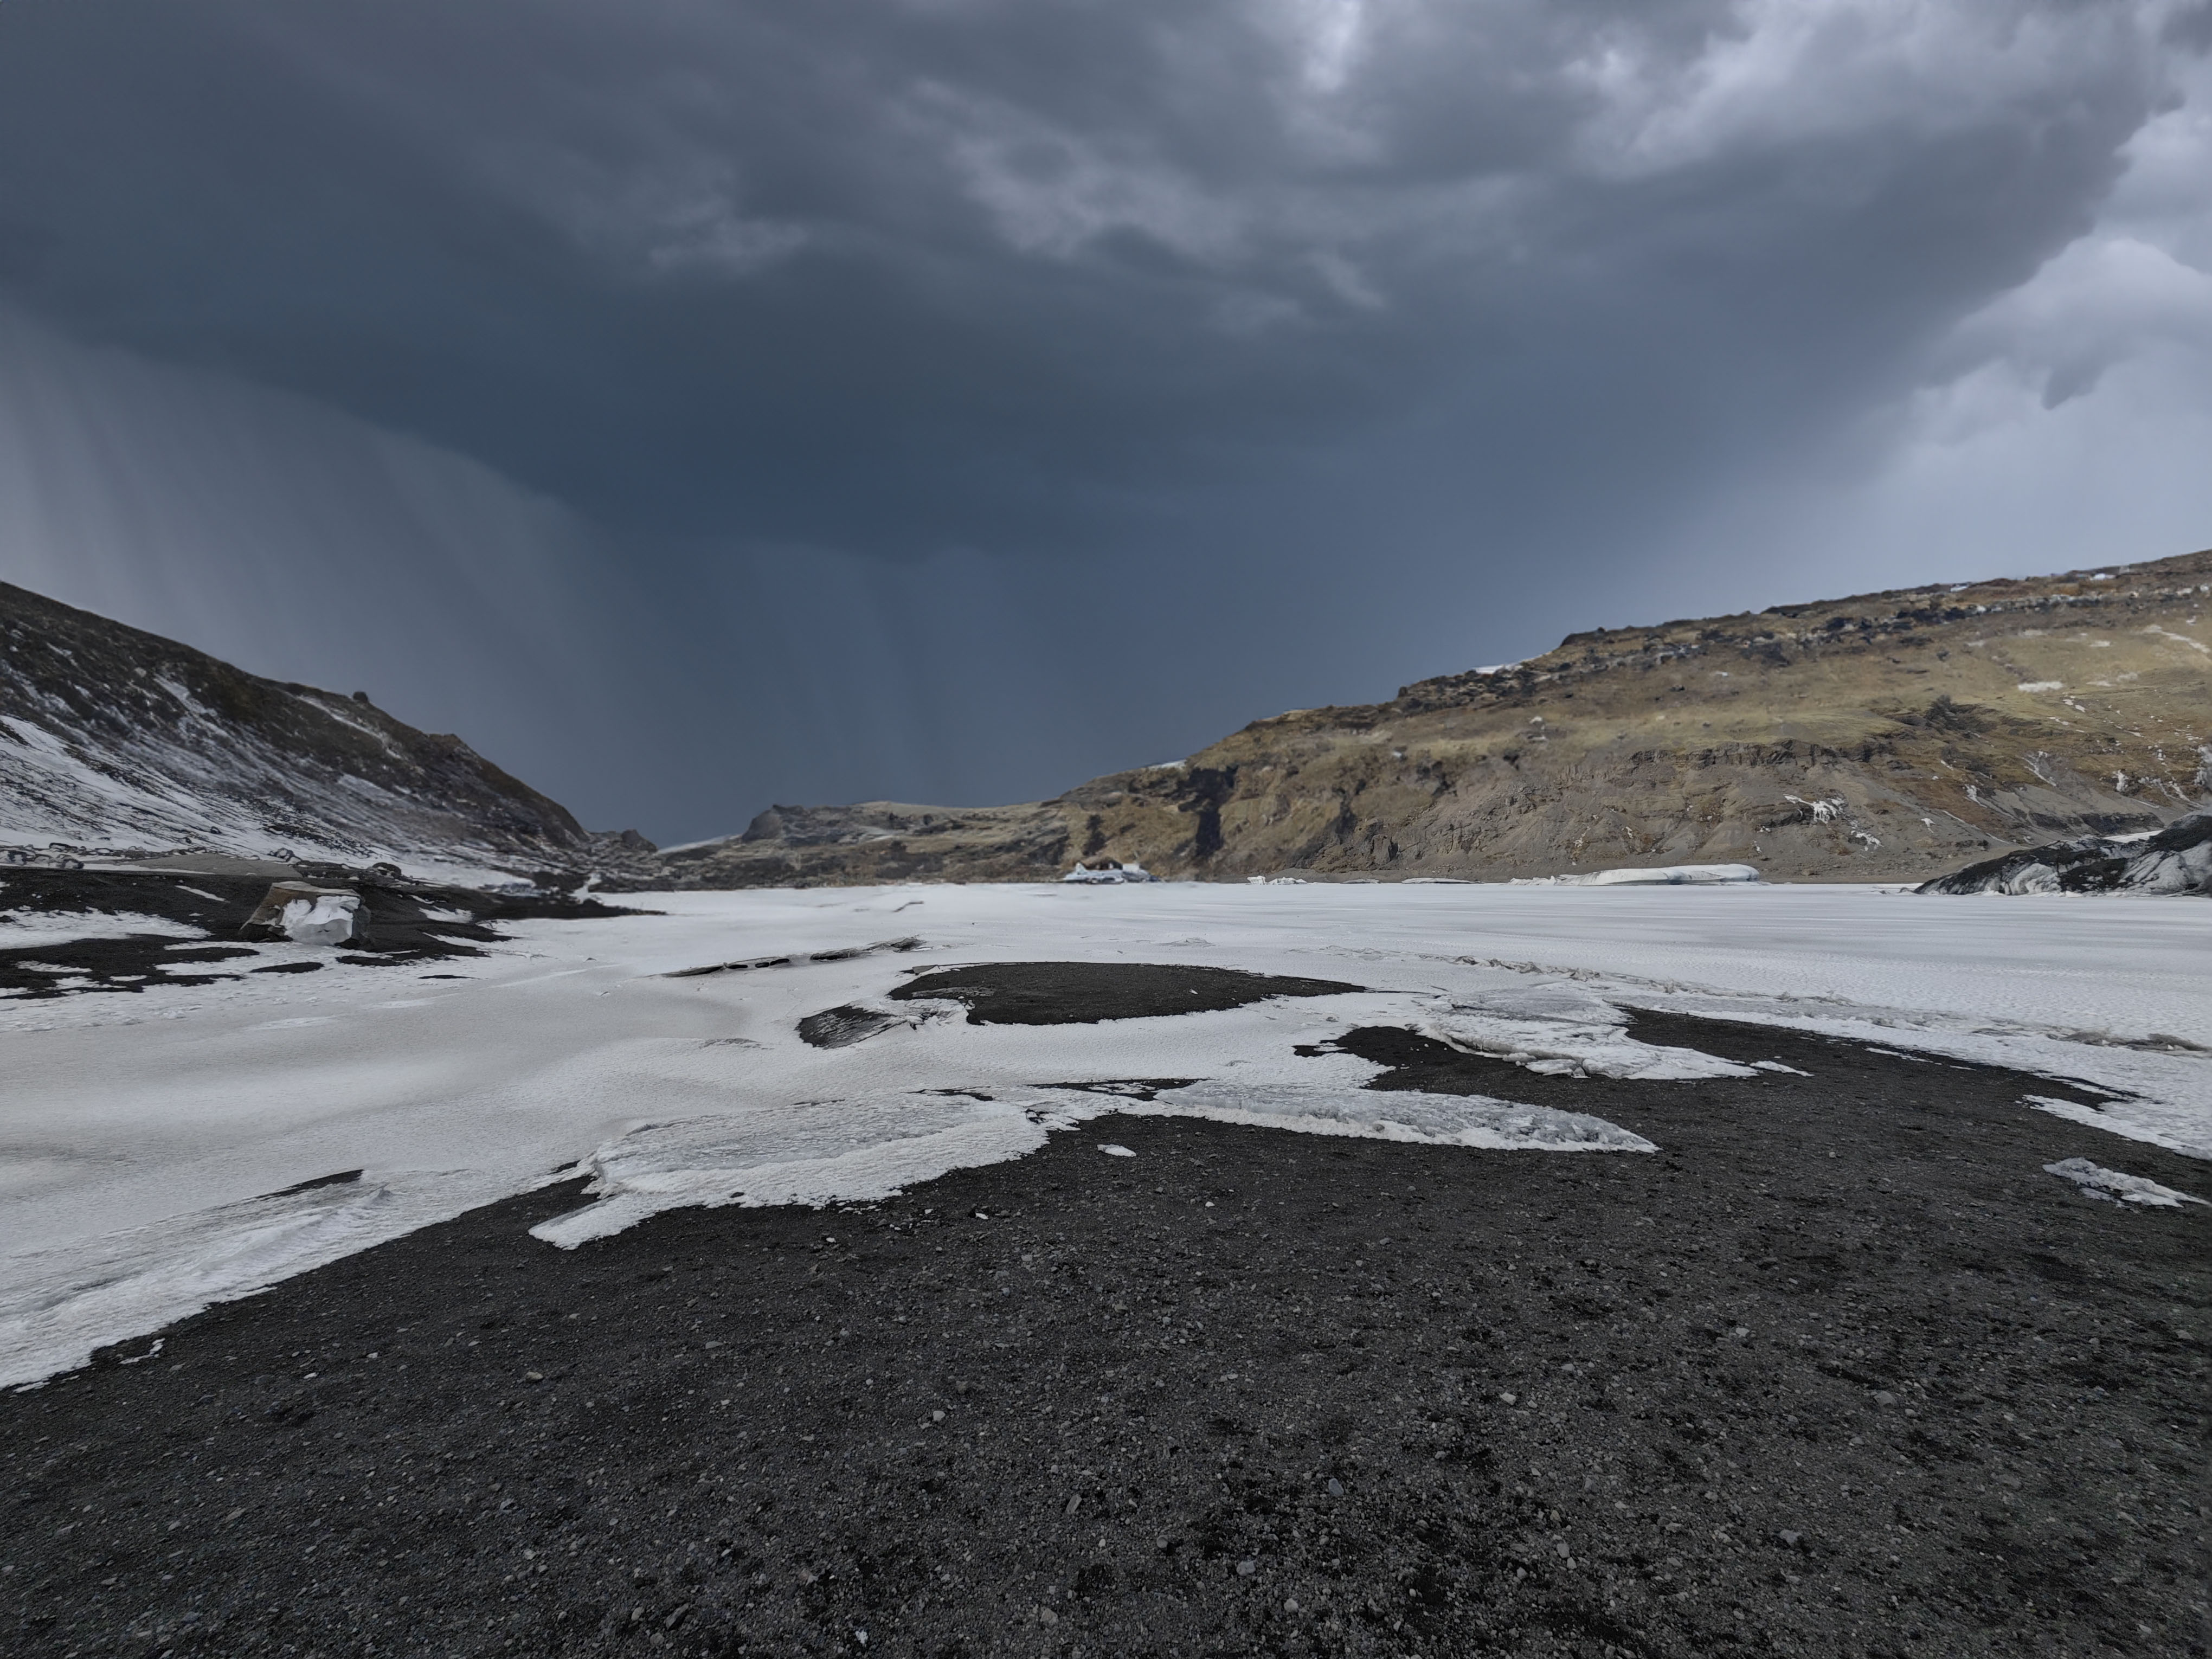 Photo of valley with snow and a dark rain cloud above.